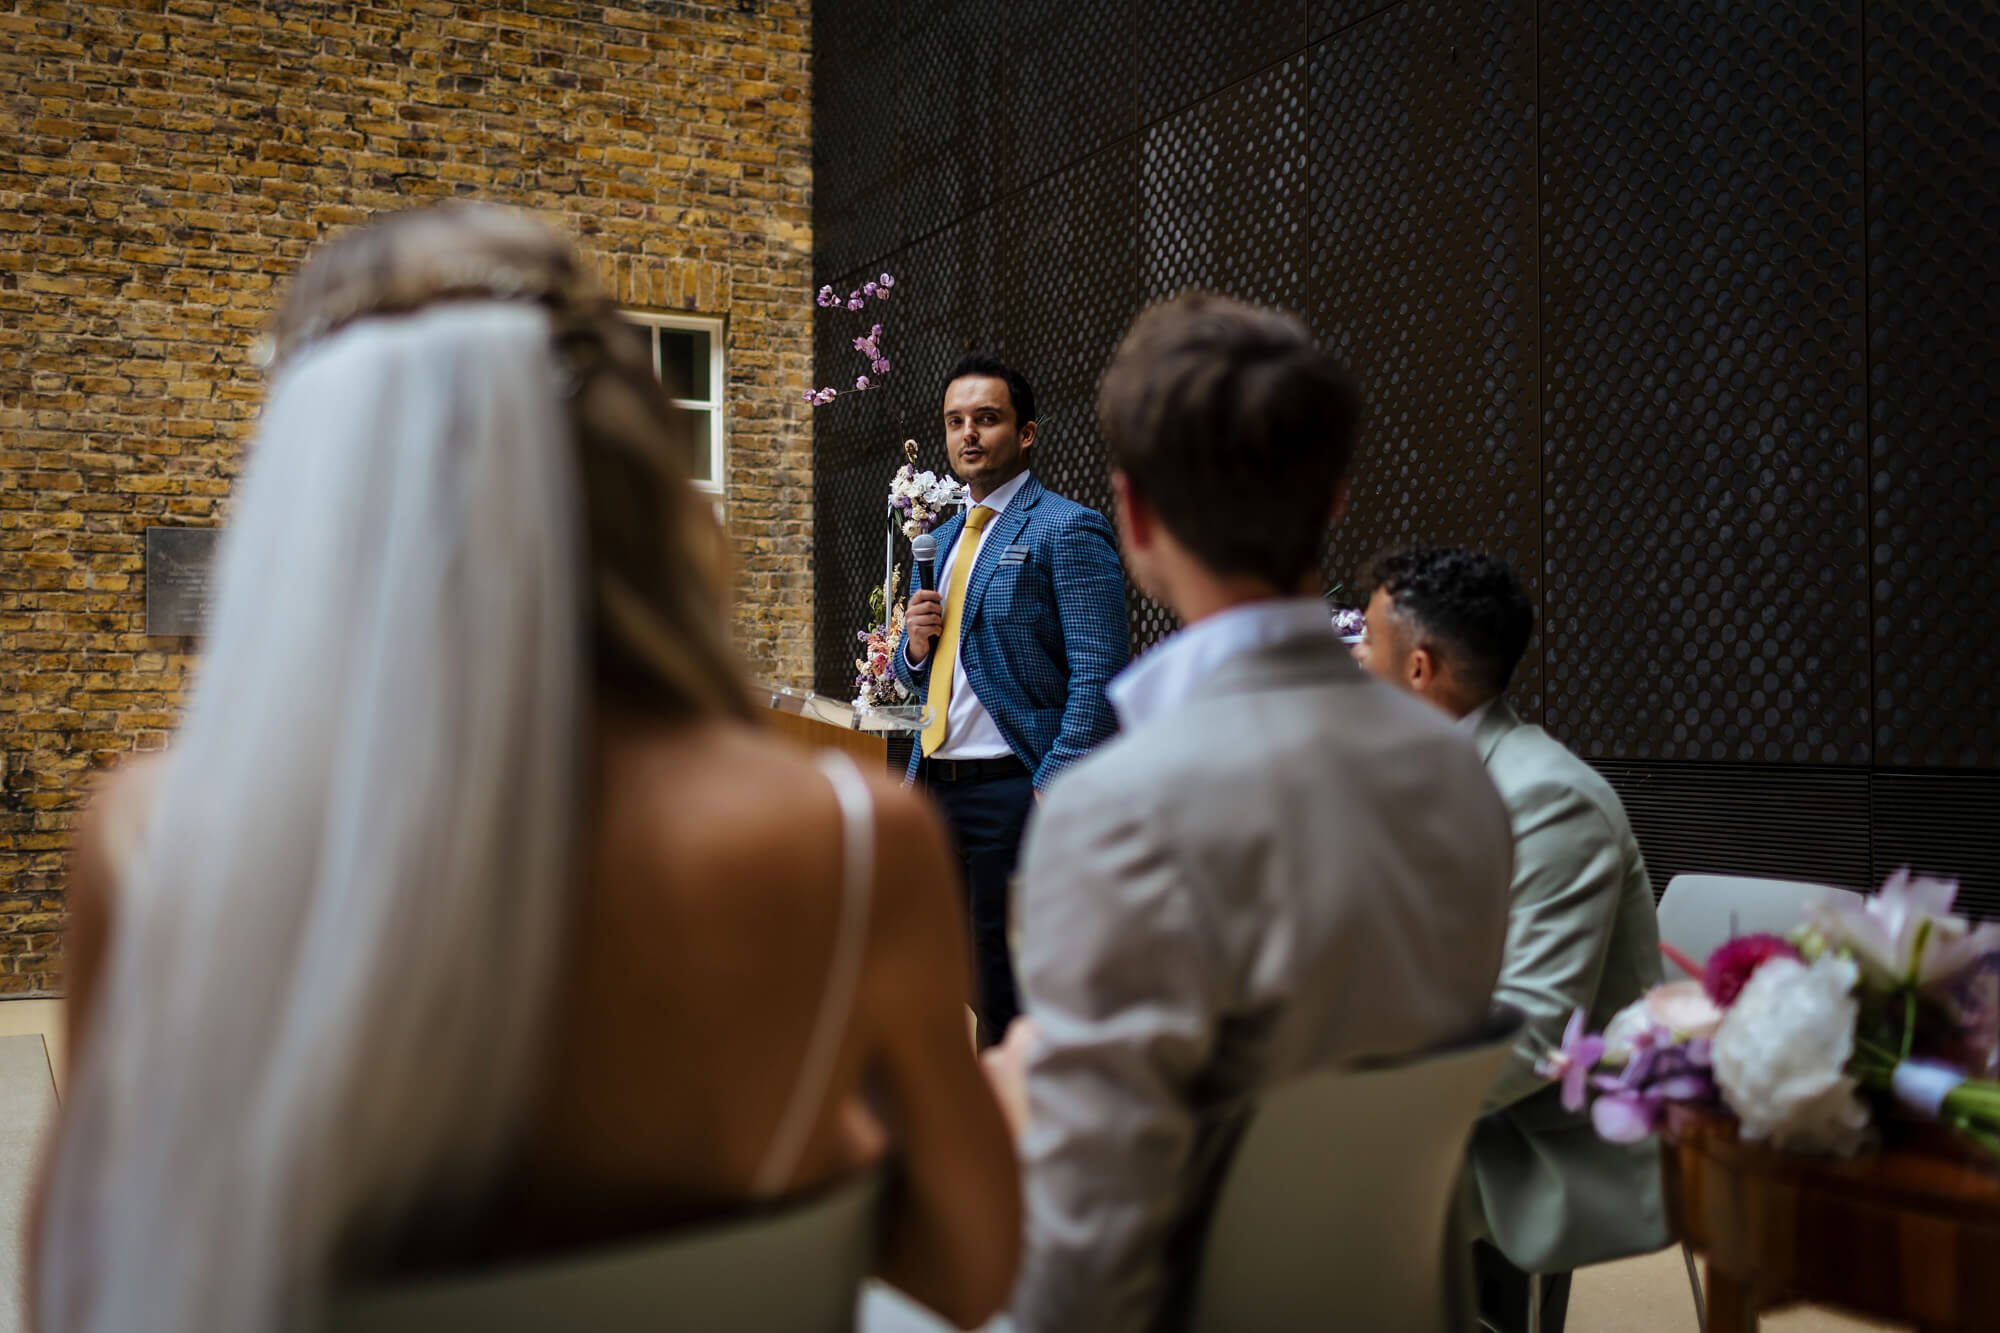 A wedding guests performs a reading during the service